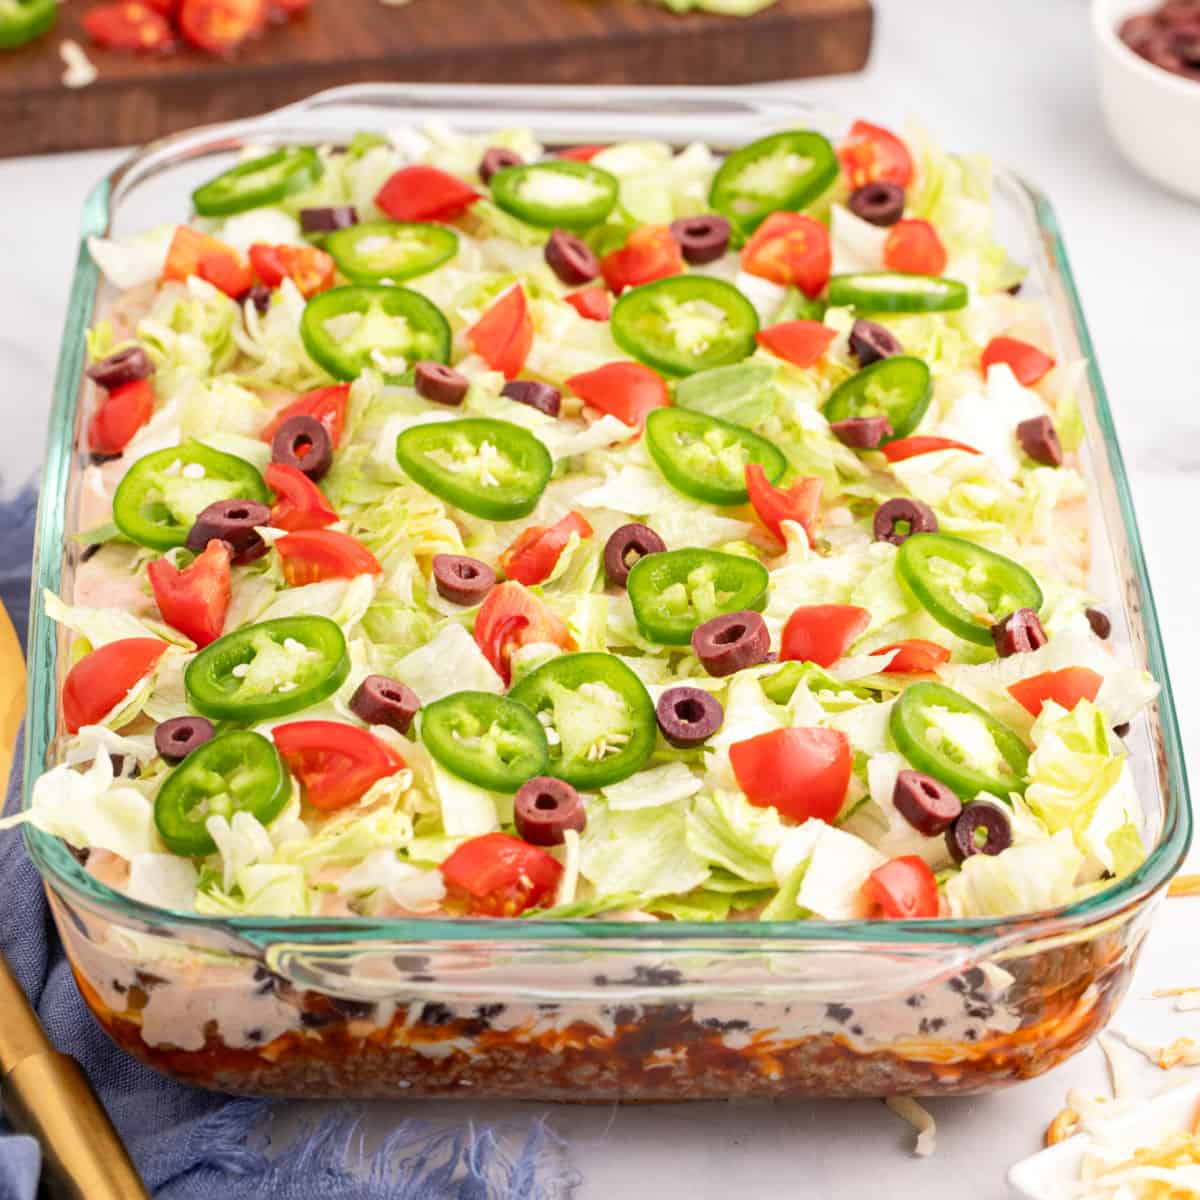 square image of layered taco salad in a baking dish showing the layers